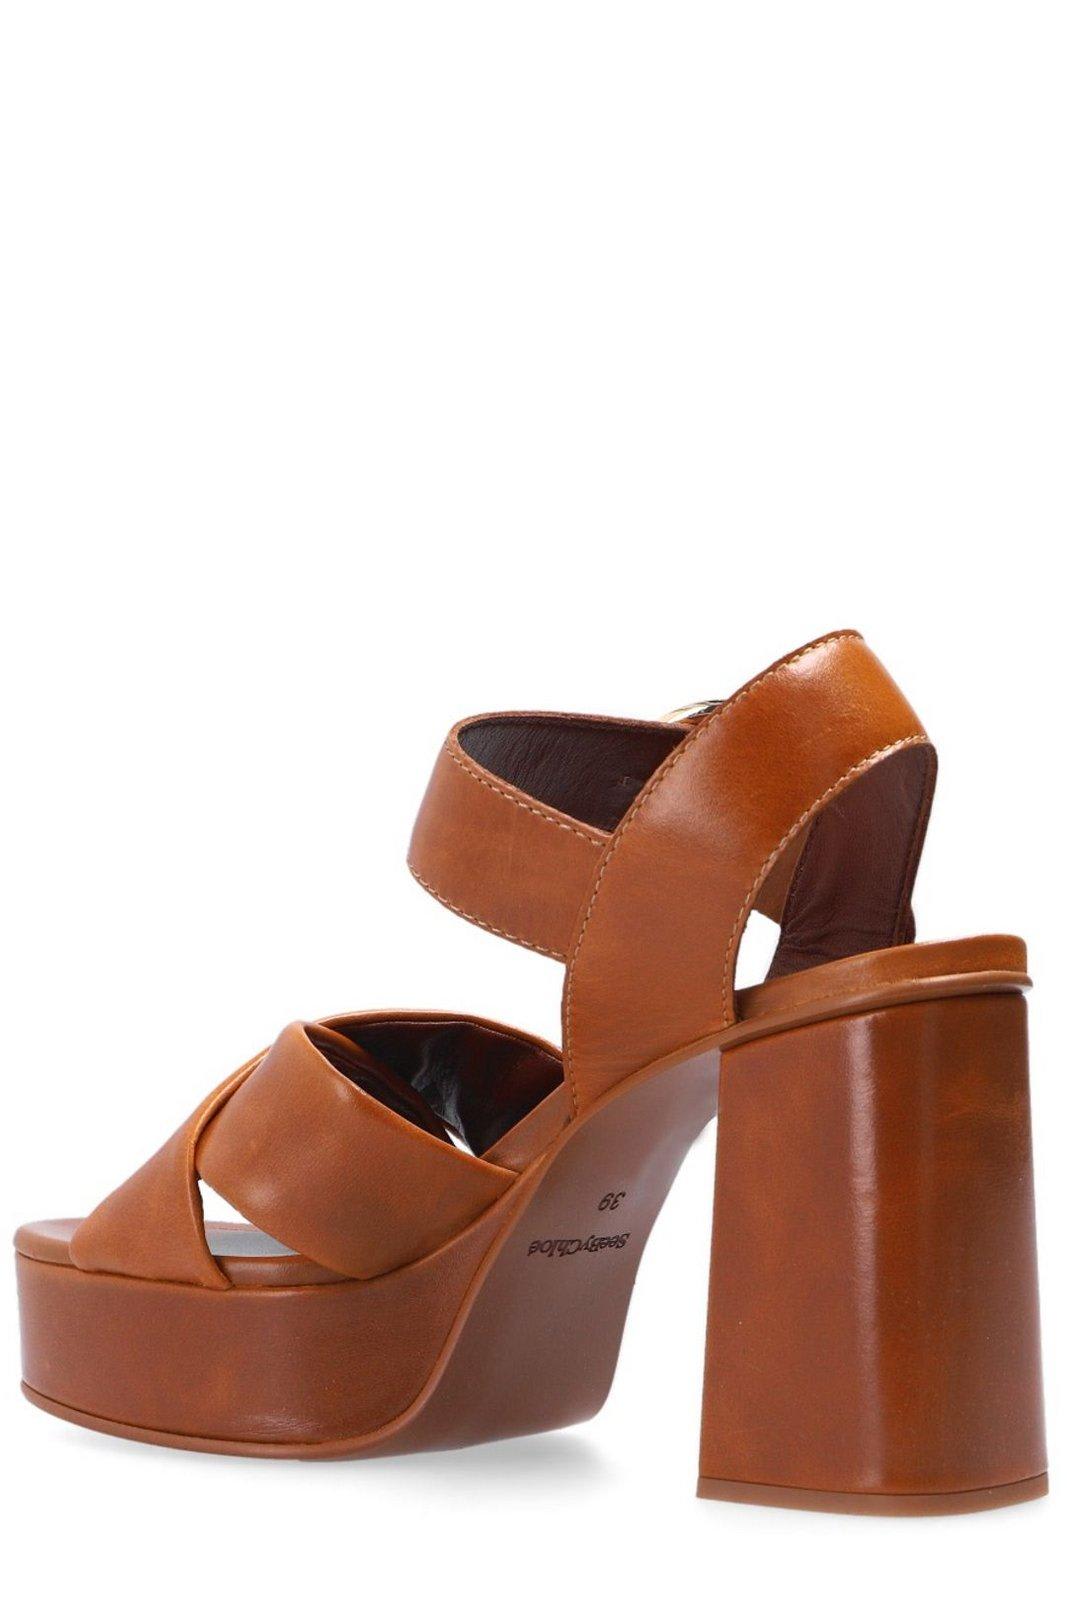 Shop See By Chloé Lyna Platform Sandals In Tan